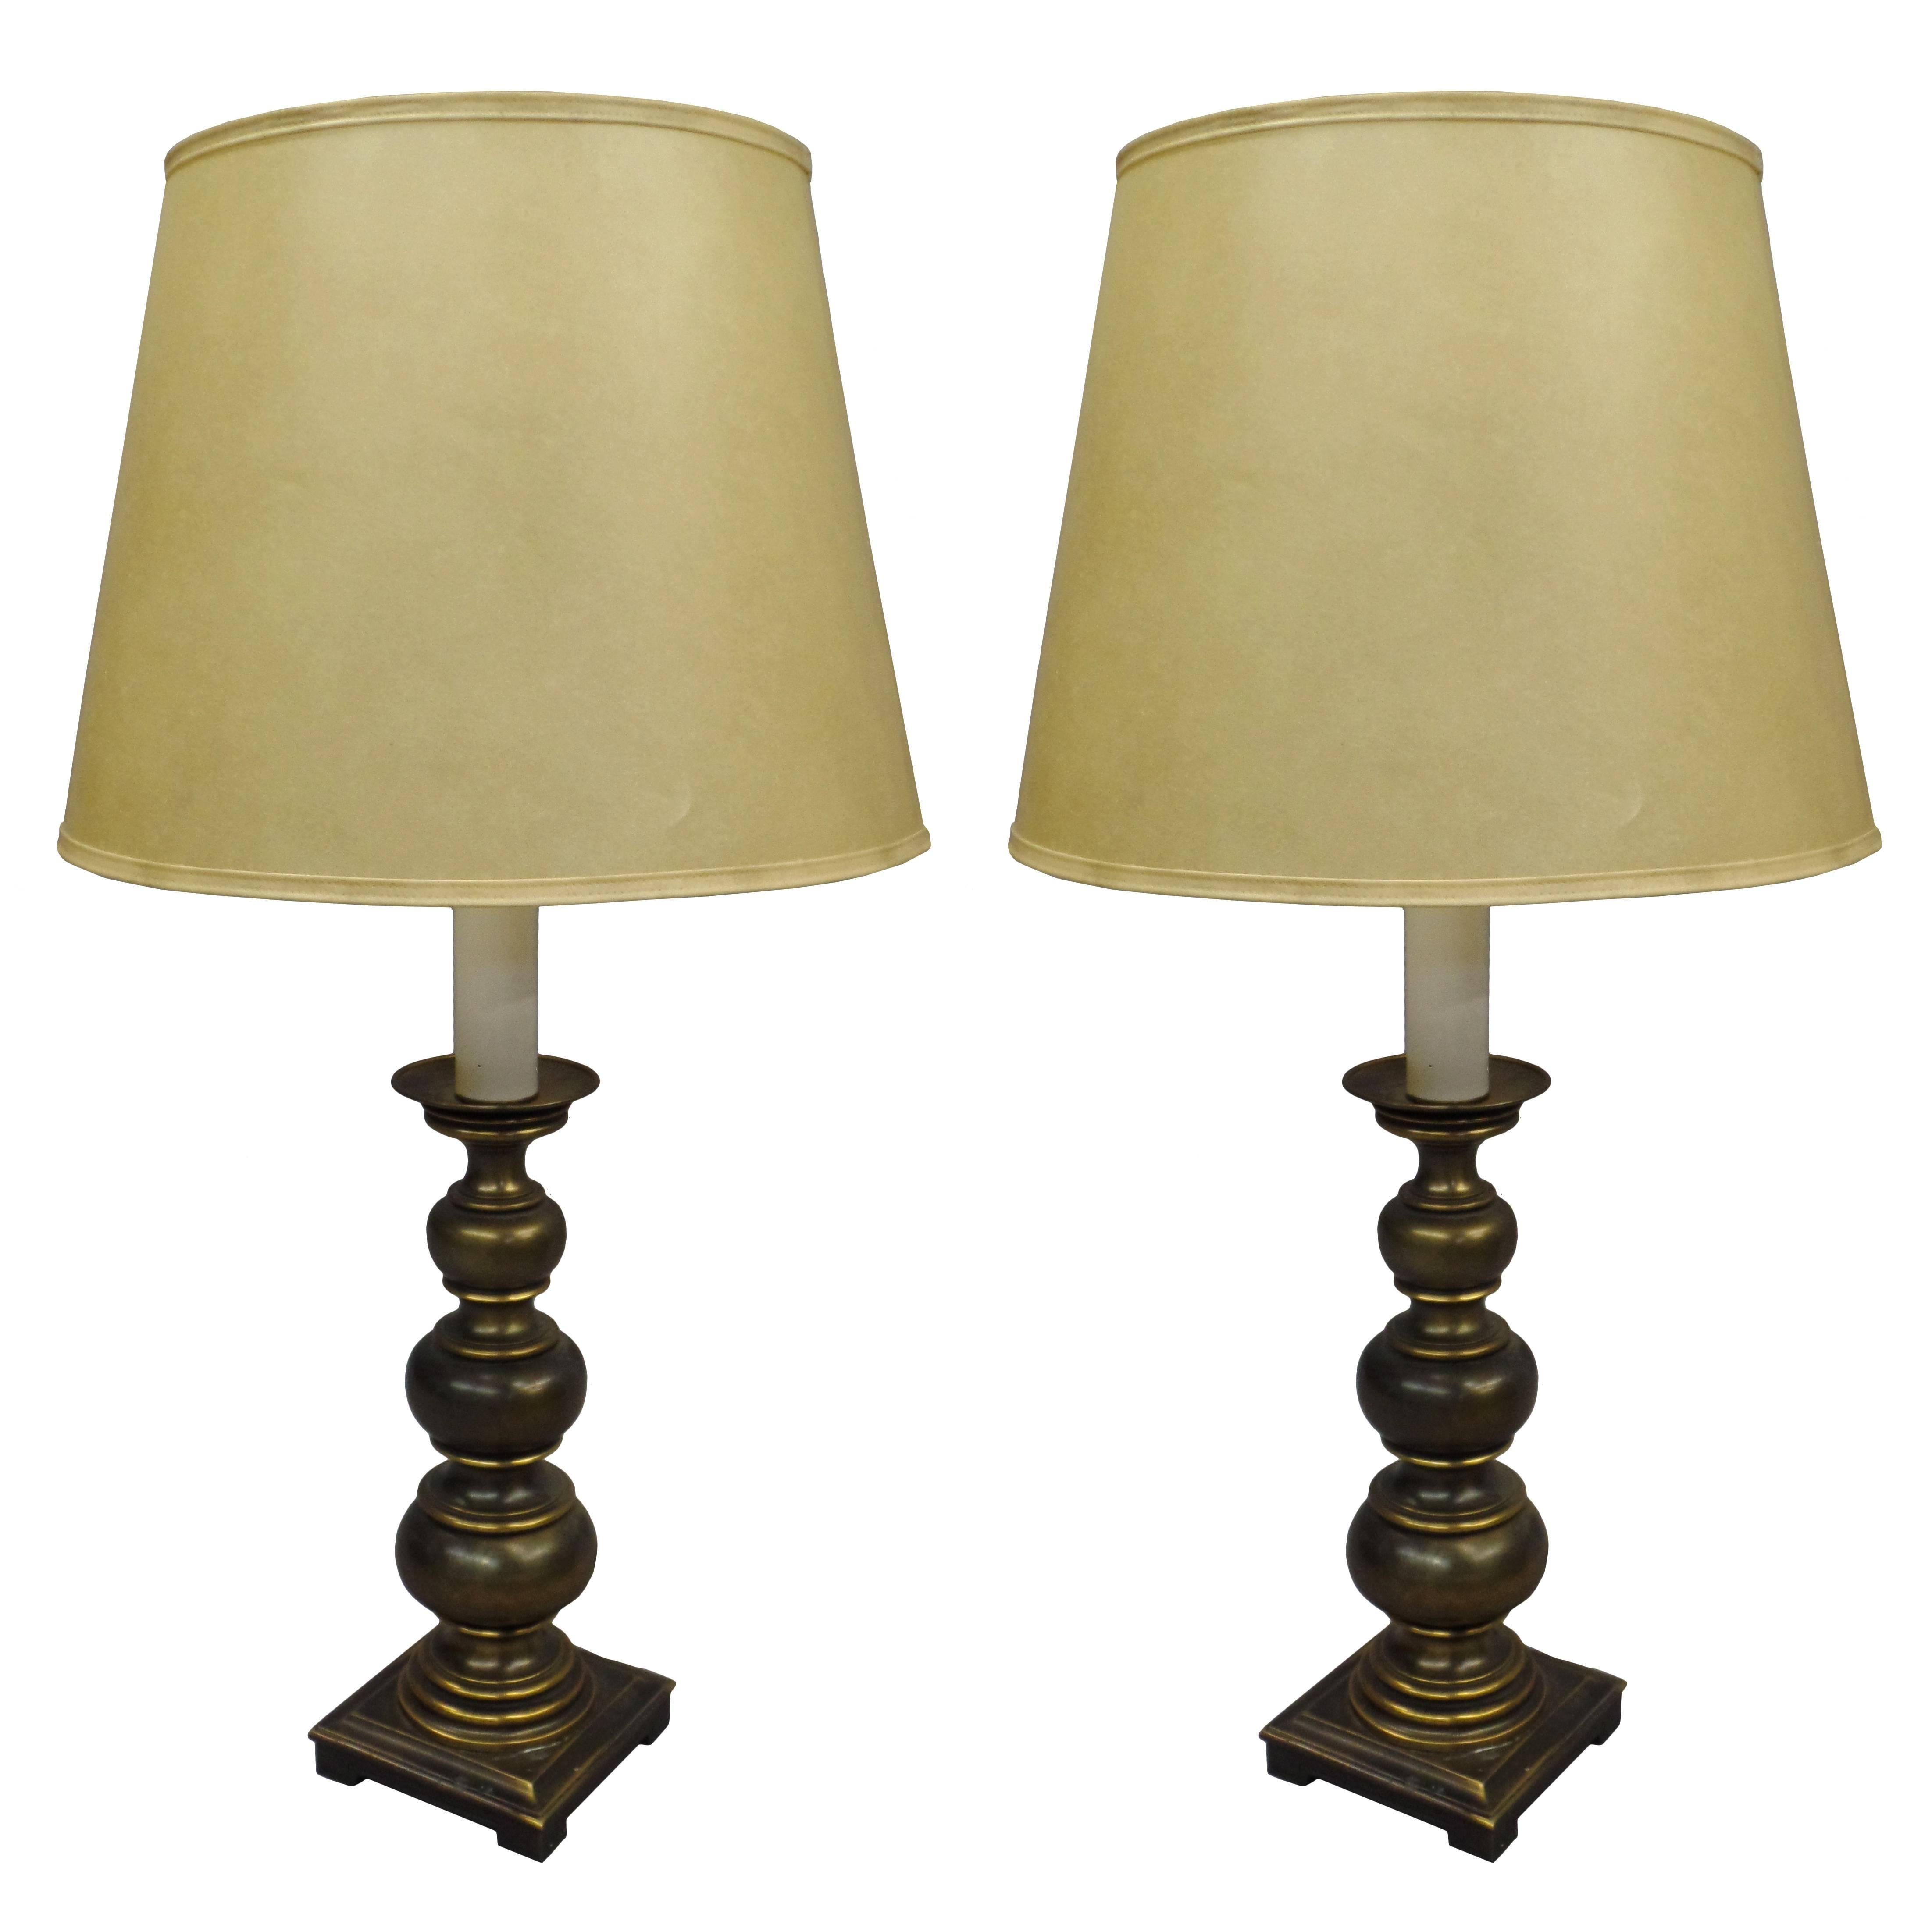 Pair of British MId-Century Modern Neoclassical Brass Ball Lamps For Sale